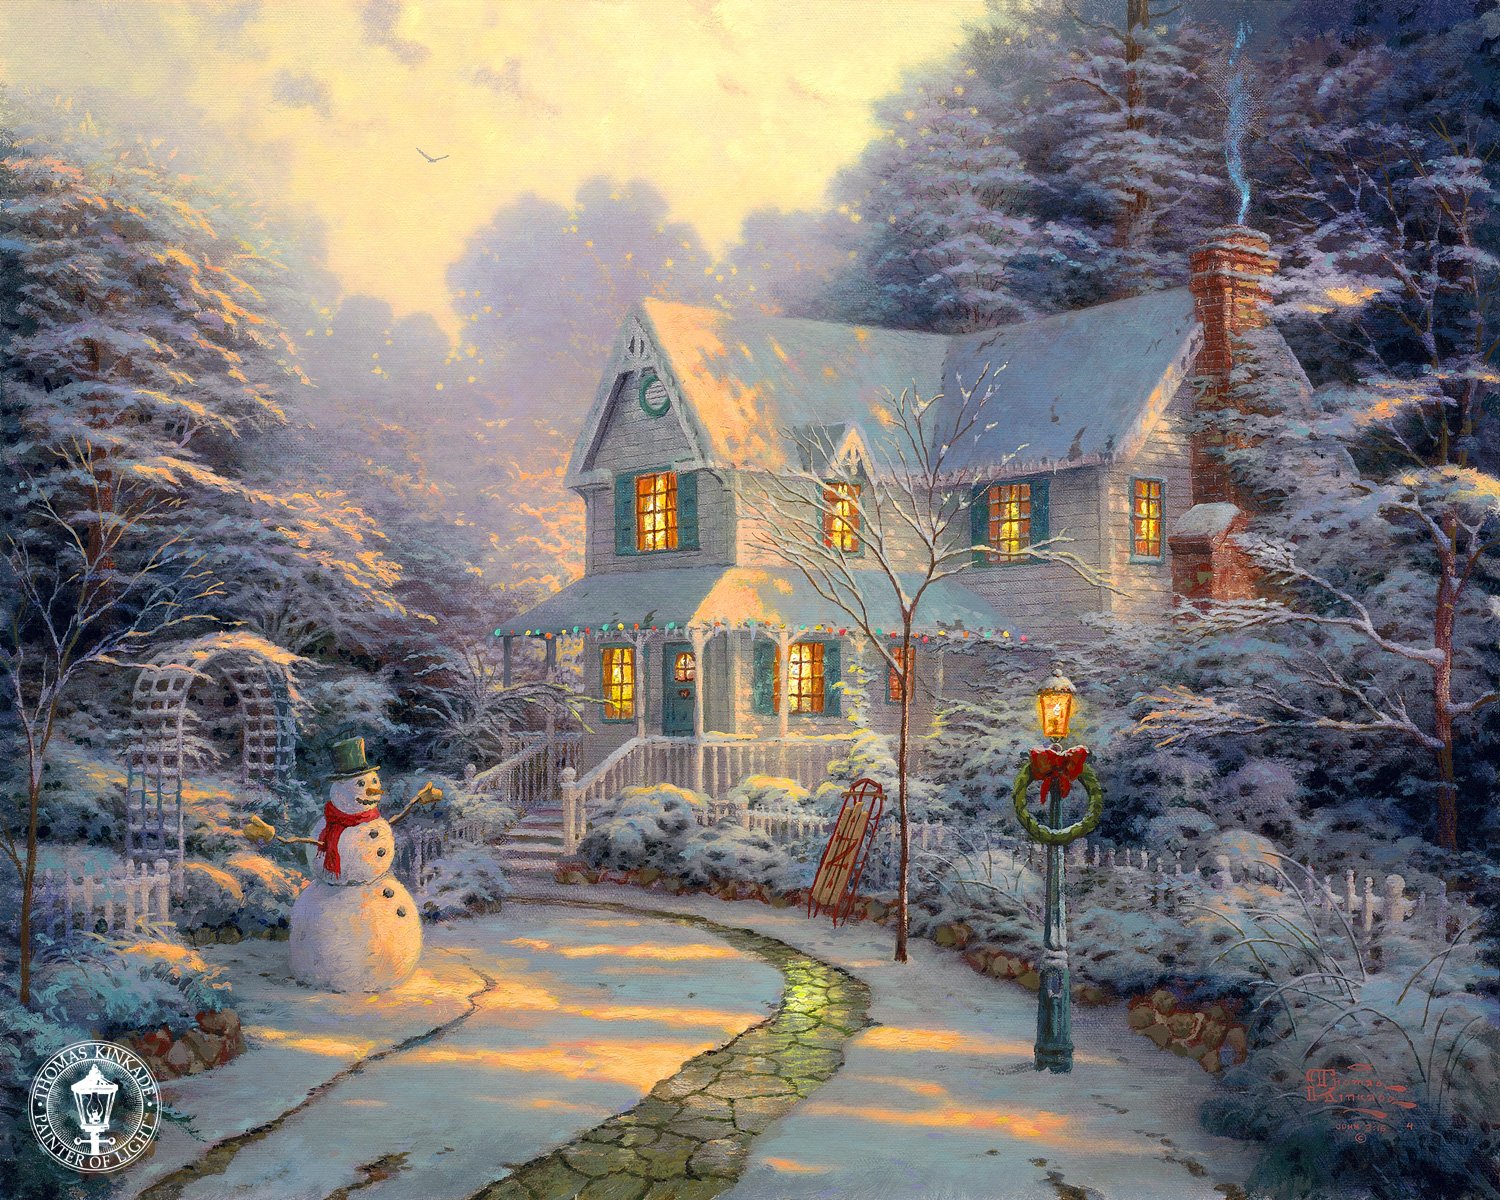 He has paintings of all different scenes. The nice cozy winter scenes: